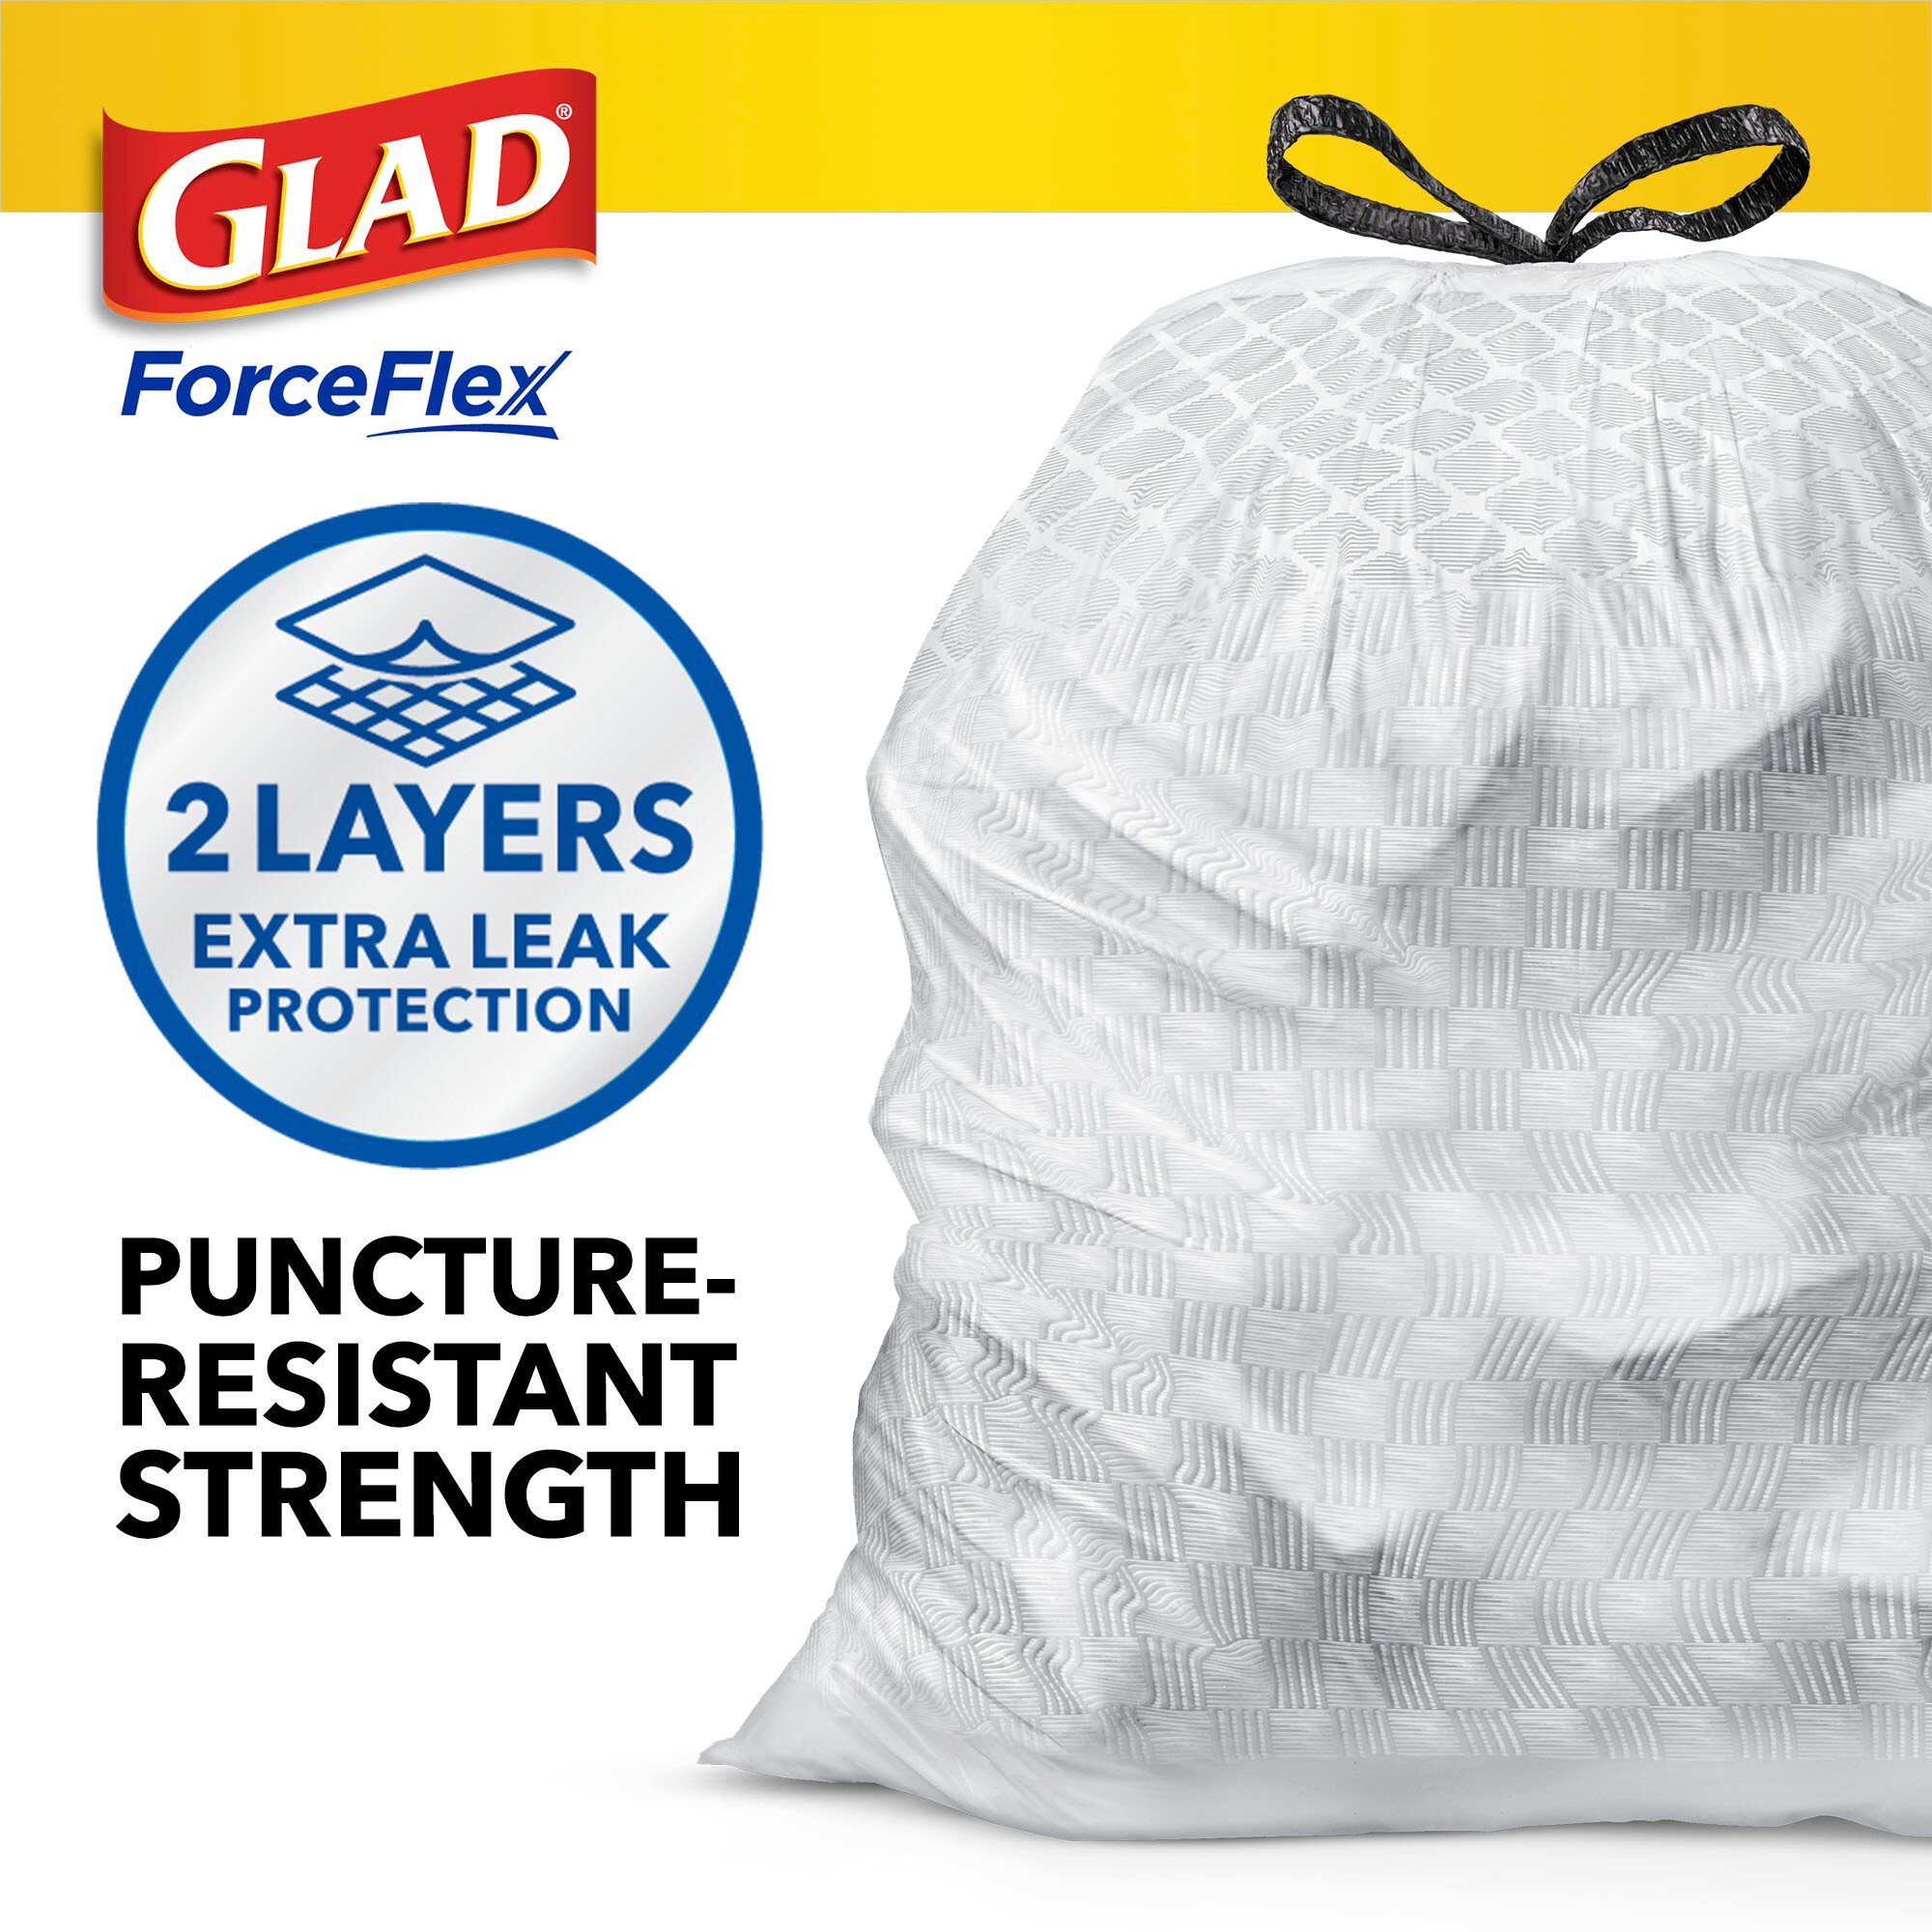 Glad OdorShield Tall Kitchen Drawstring Trash Bags - Febreze Lemon Scent -  13 Gallon - Pack of 40 (Packaging May Vary)